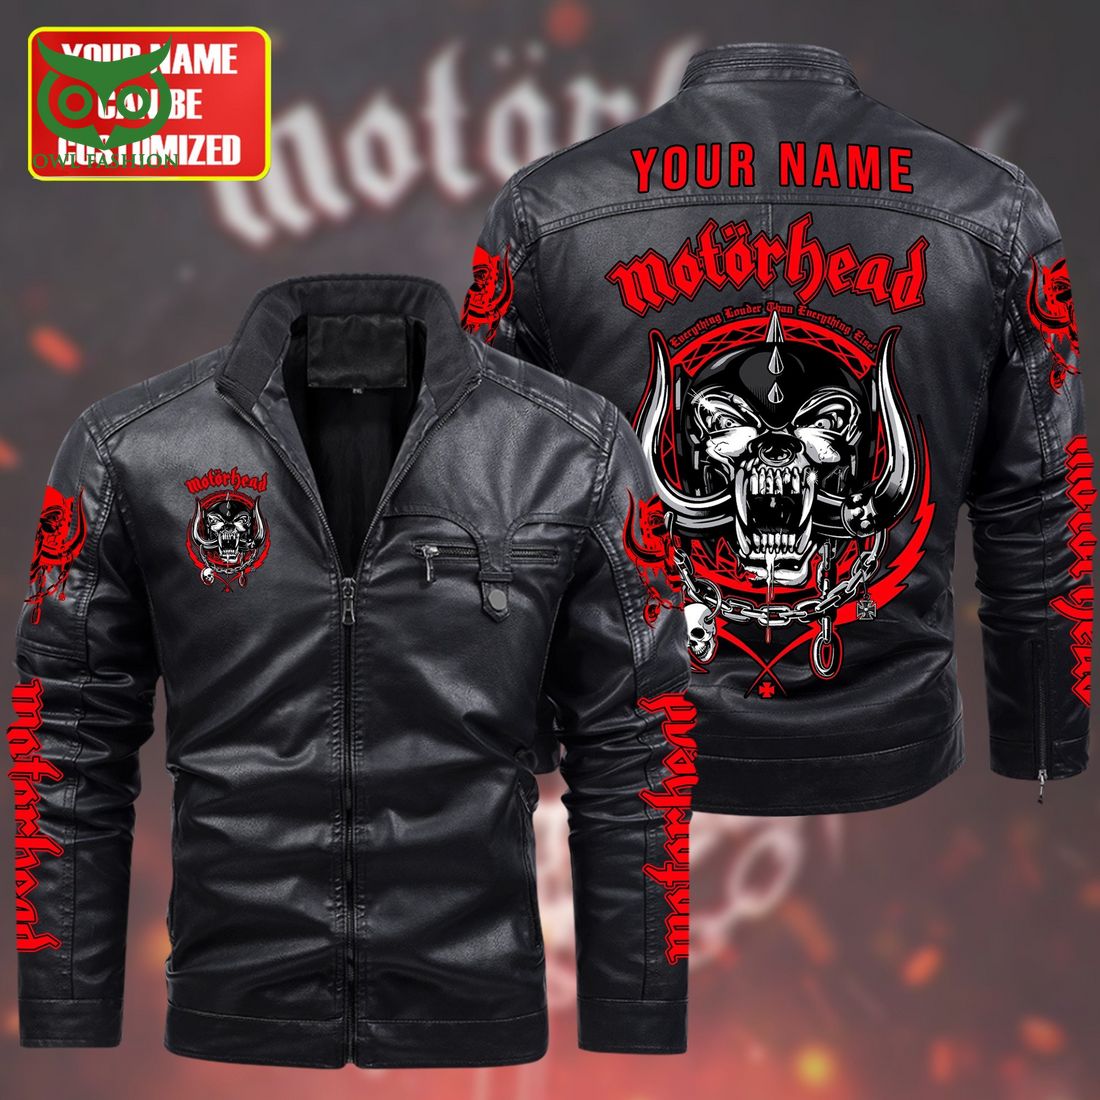 Personalized Motorhead Fleece Leather Jacket Such a charming picture.